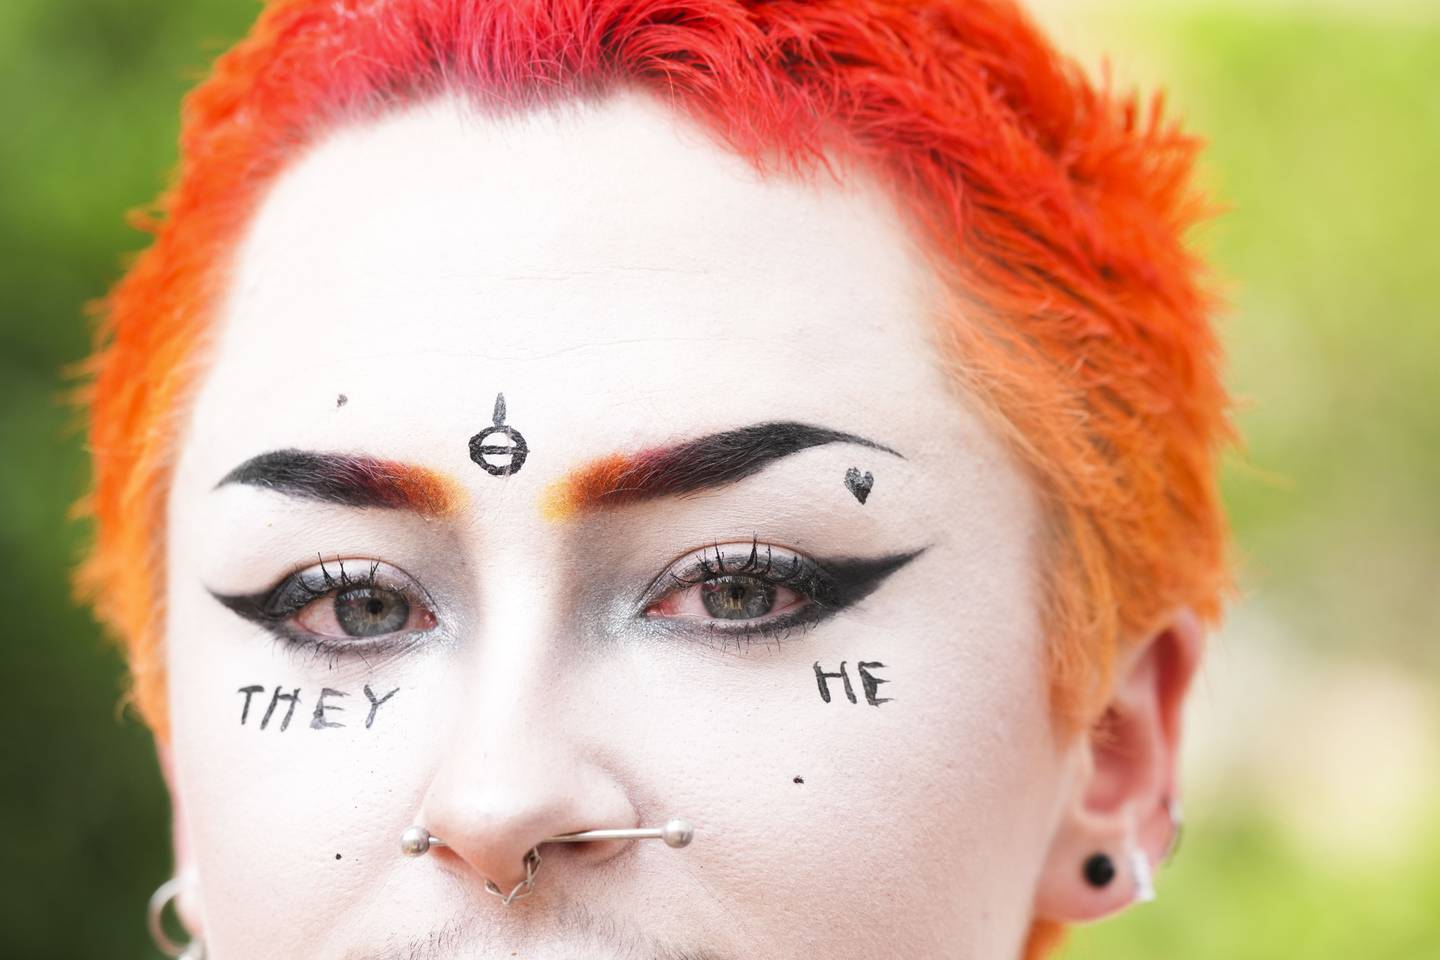 Spencer Stockton, 22, shows of makeup featuring their preferred pronouns at Annapolis Pride parade and festival on June 3, 2023.